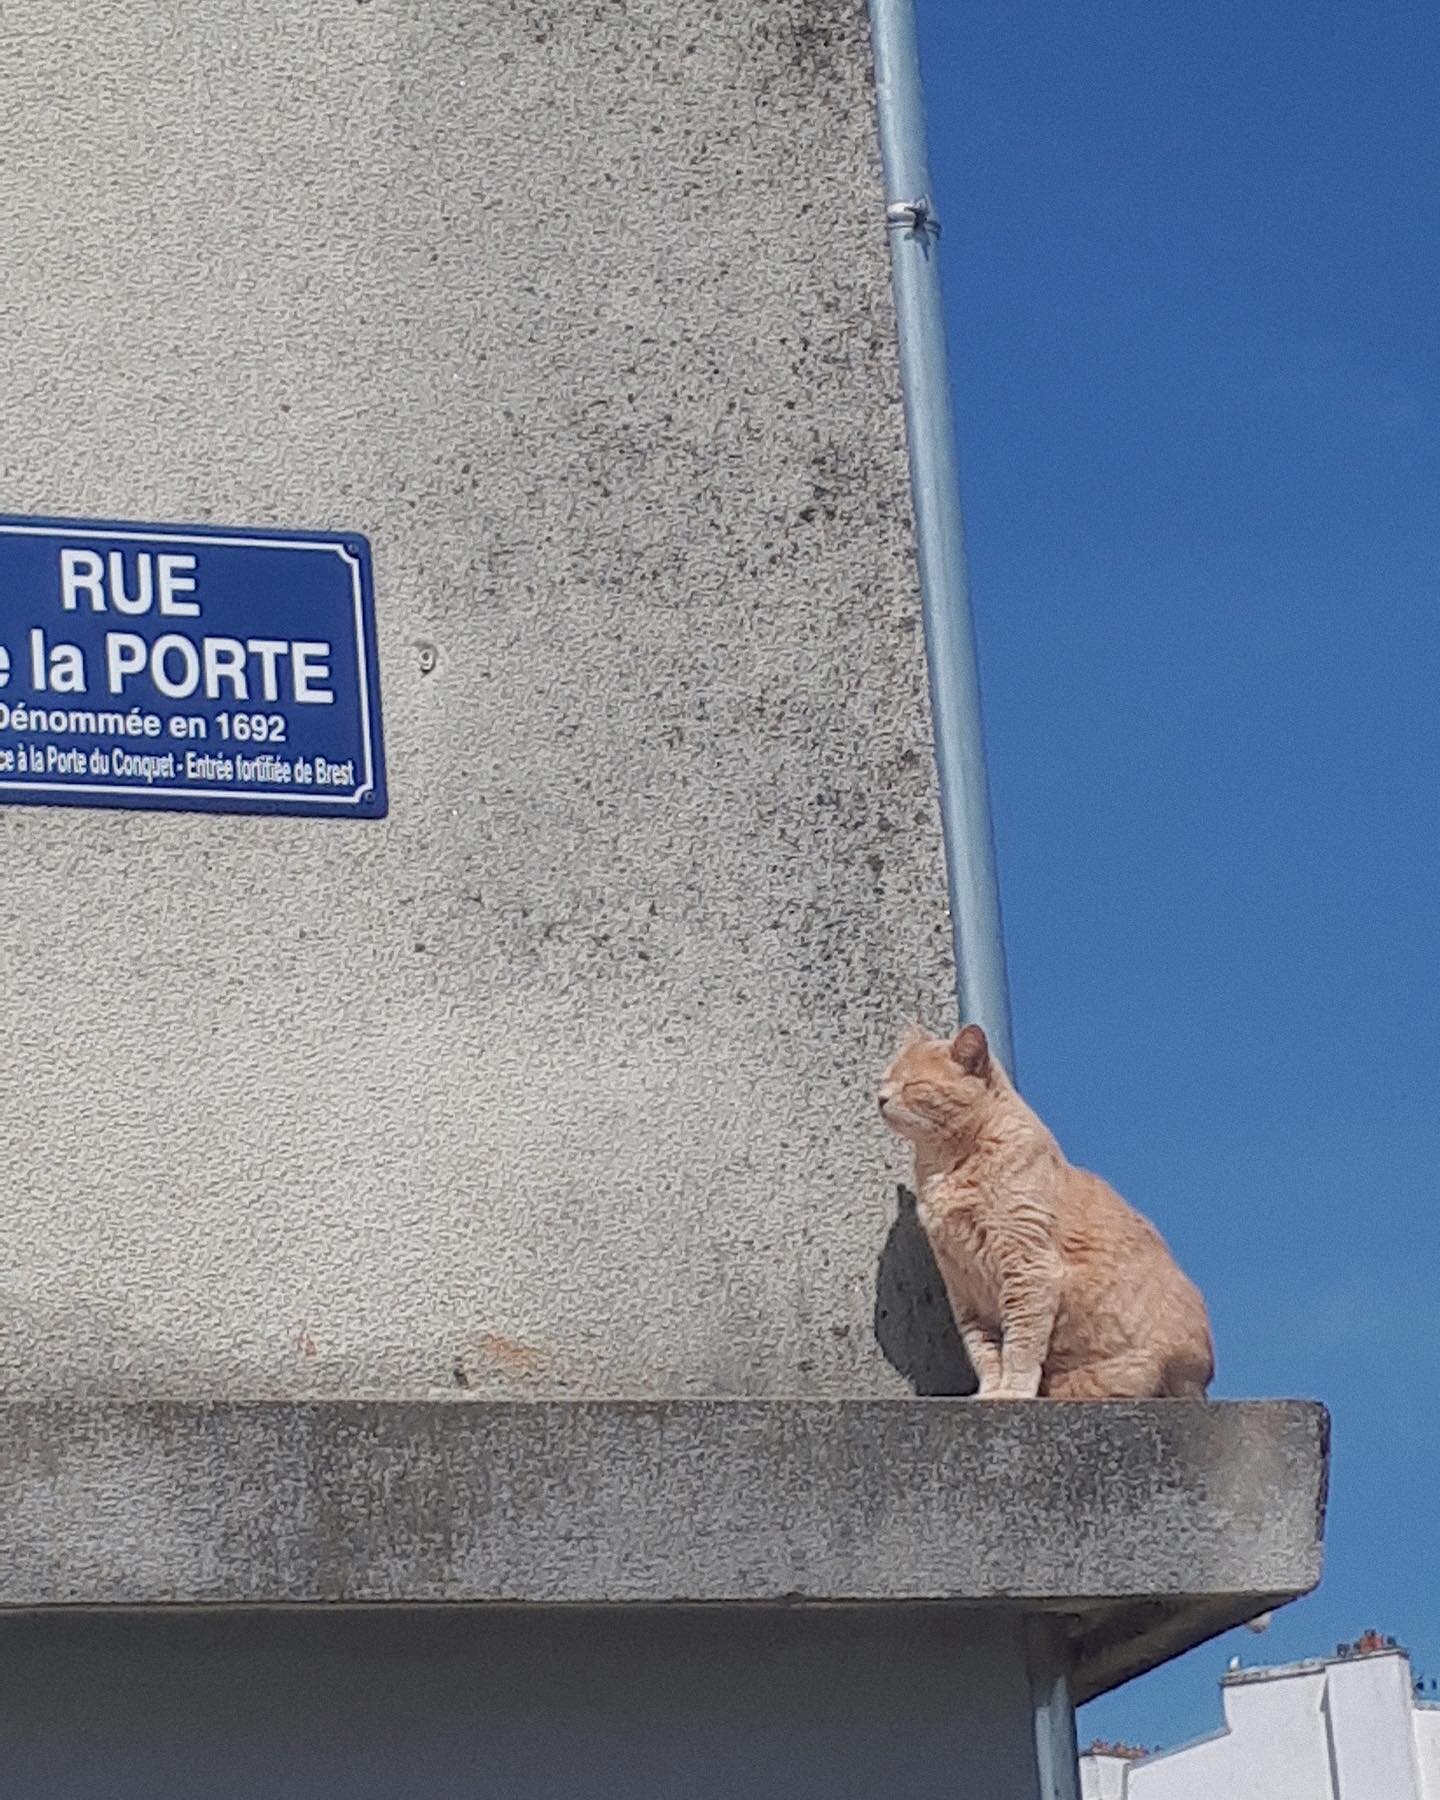 waiting for spring like ✿
.
.
.
.
#spring #sun #cat #kitty #kitten #tbt #aesthetic #instagood #inspiration #waiting #city #seaside #sunnyday #defibriques #bluesky #breath #feelinggood